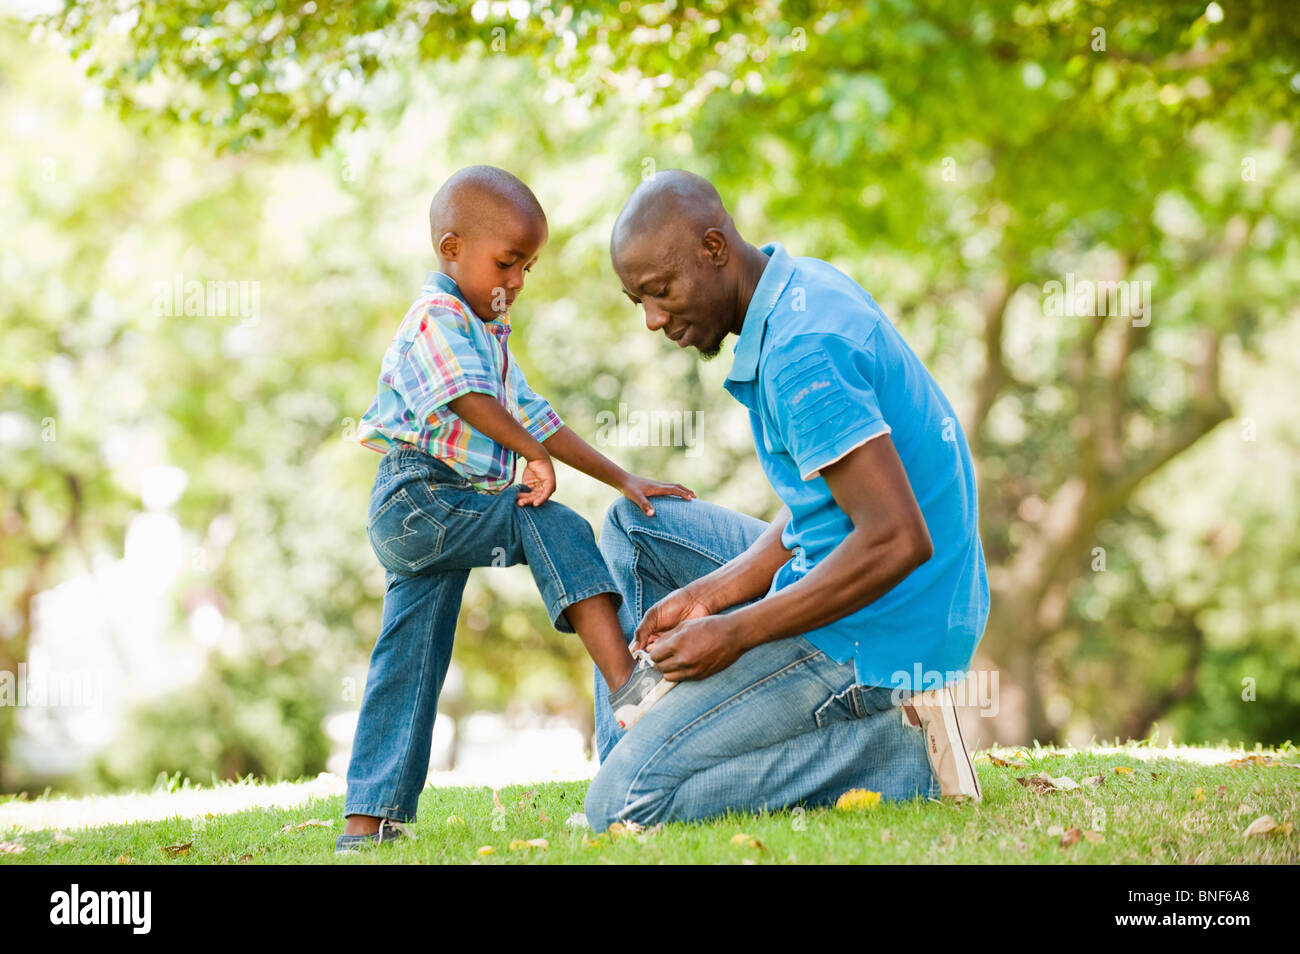 Father tying shoelace for son (4-5) in garden, Johannesburg, Gauteng Province, South Africa Stock Photo